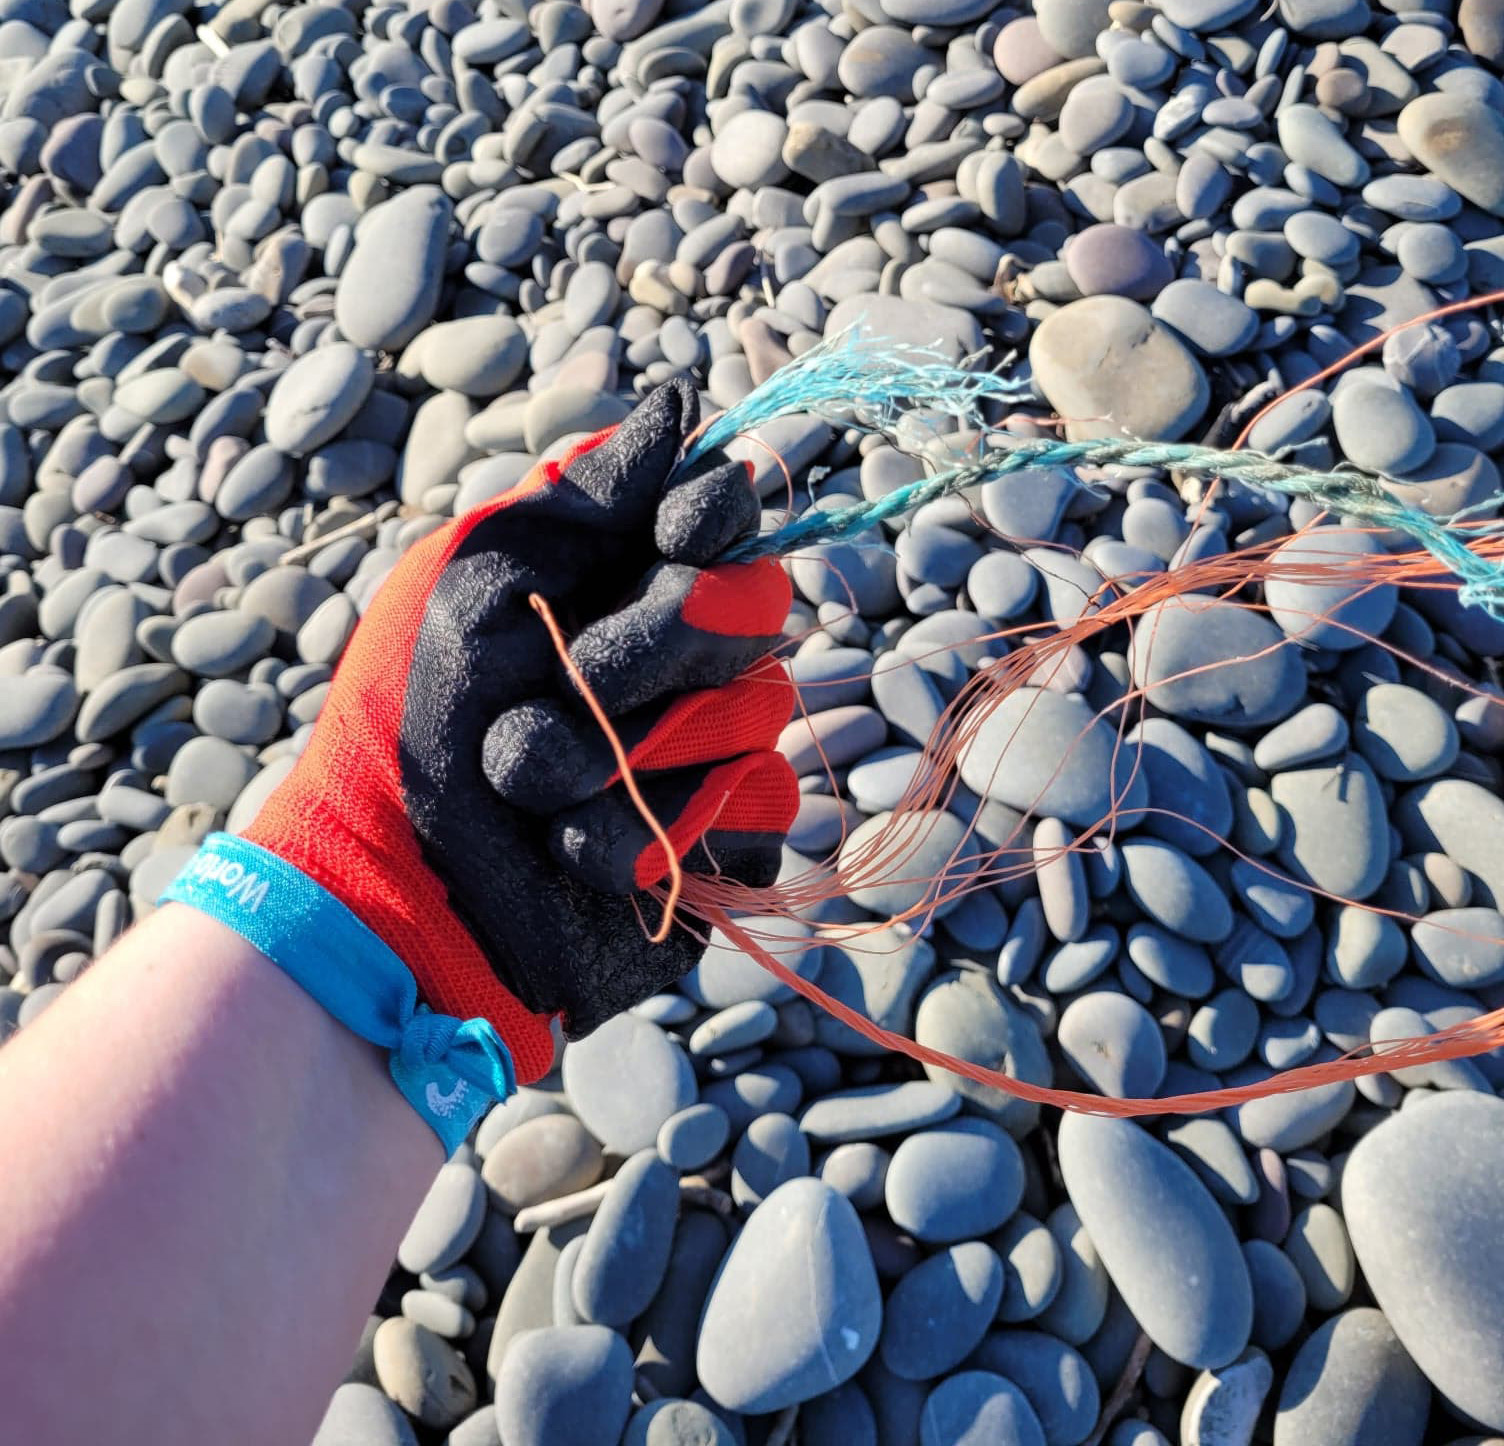 Stopping Ghost Gear, Projects